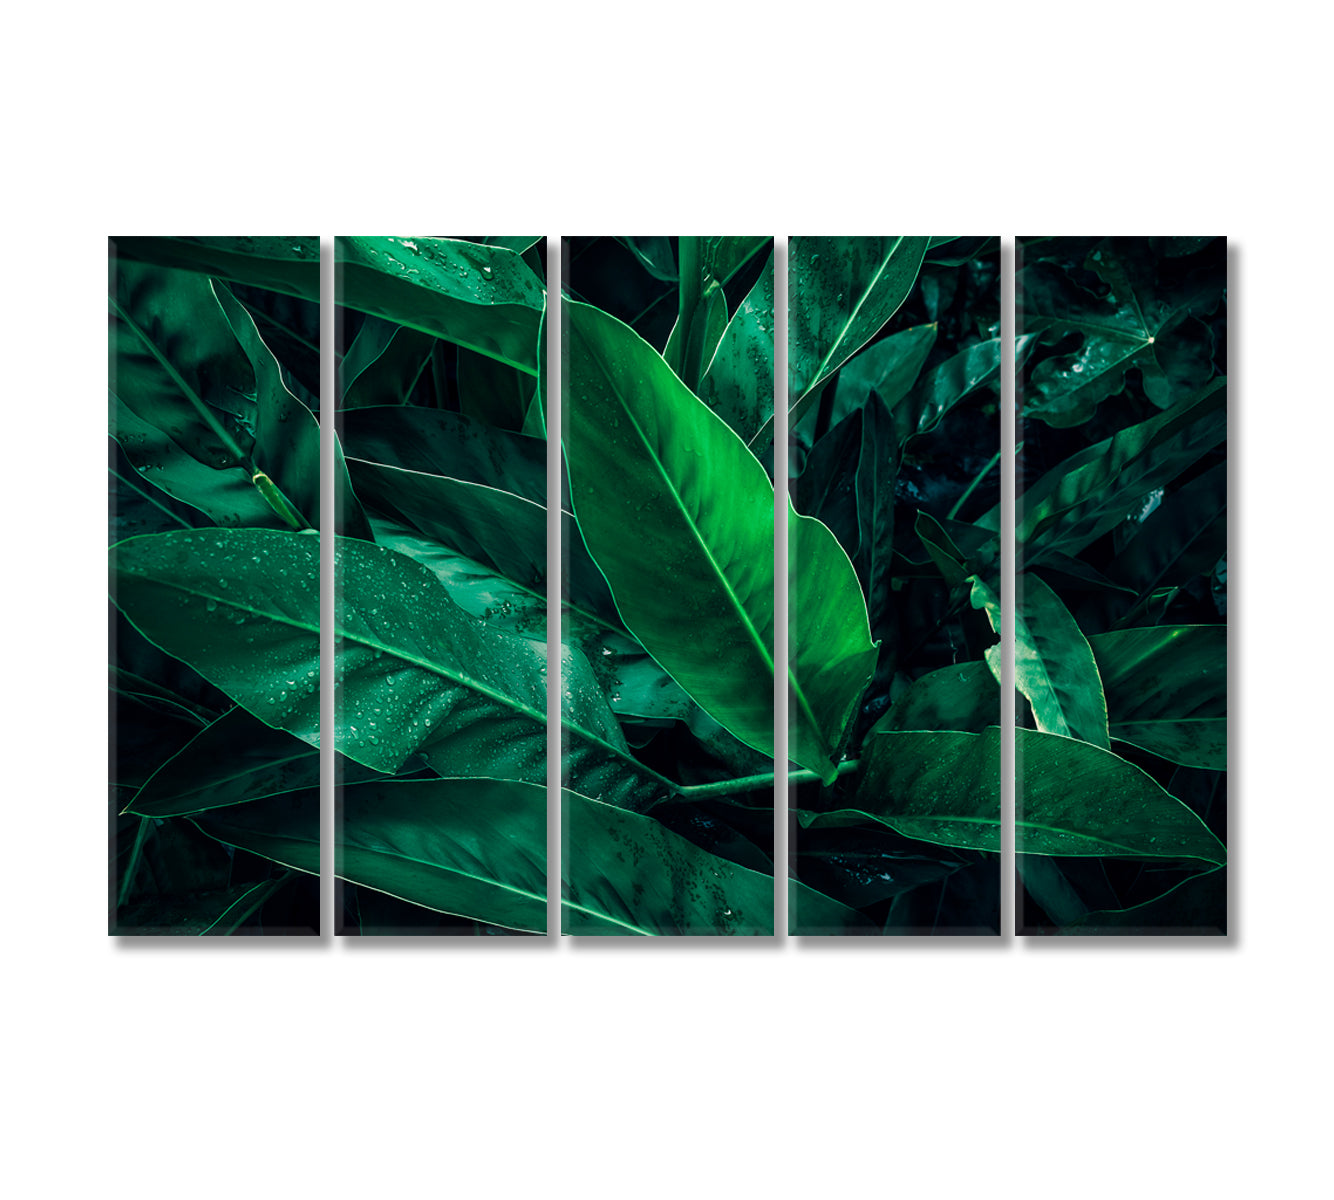 Large Tropical Leaf with Water Drops Canvas Print-Canvas Print-CetArt-5 Panels-36x24 inches-CetArt